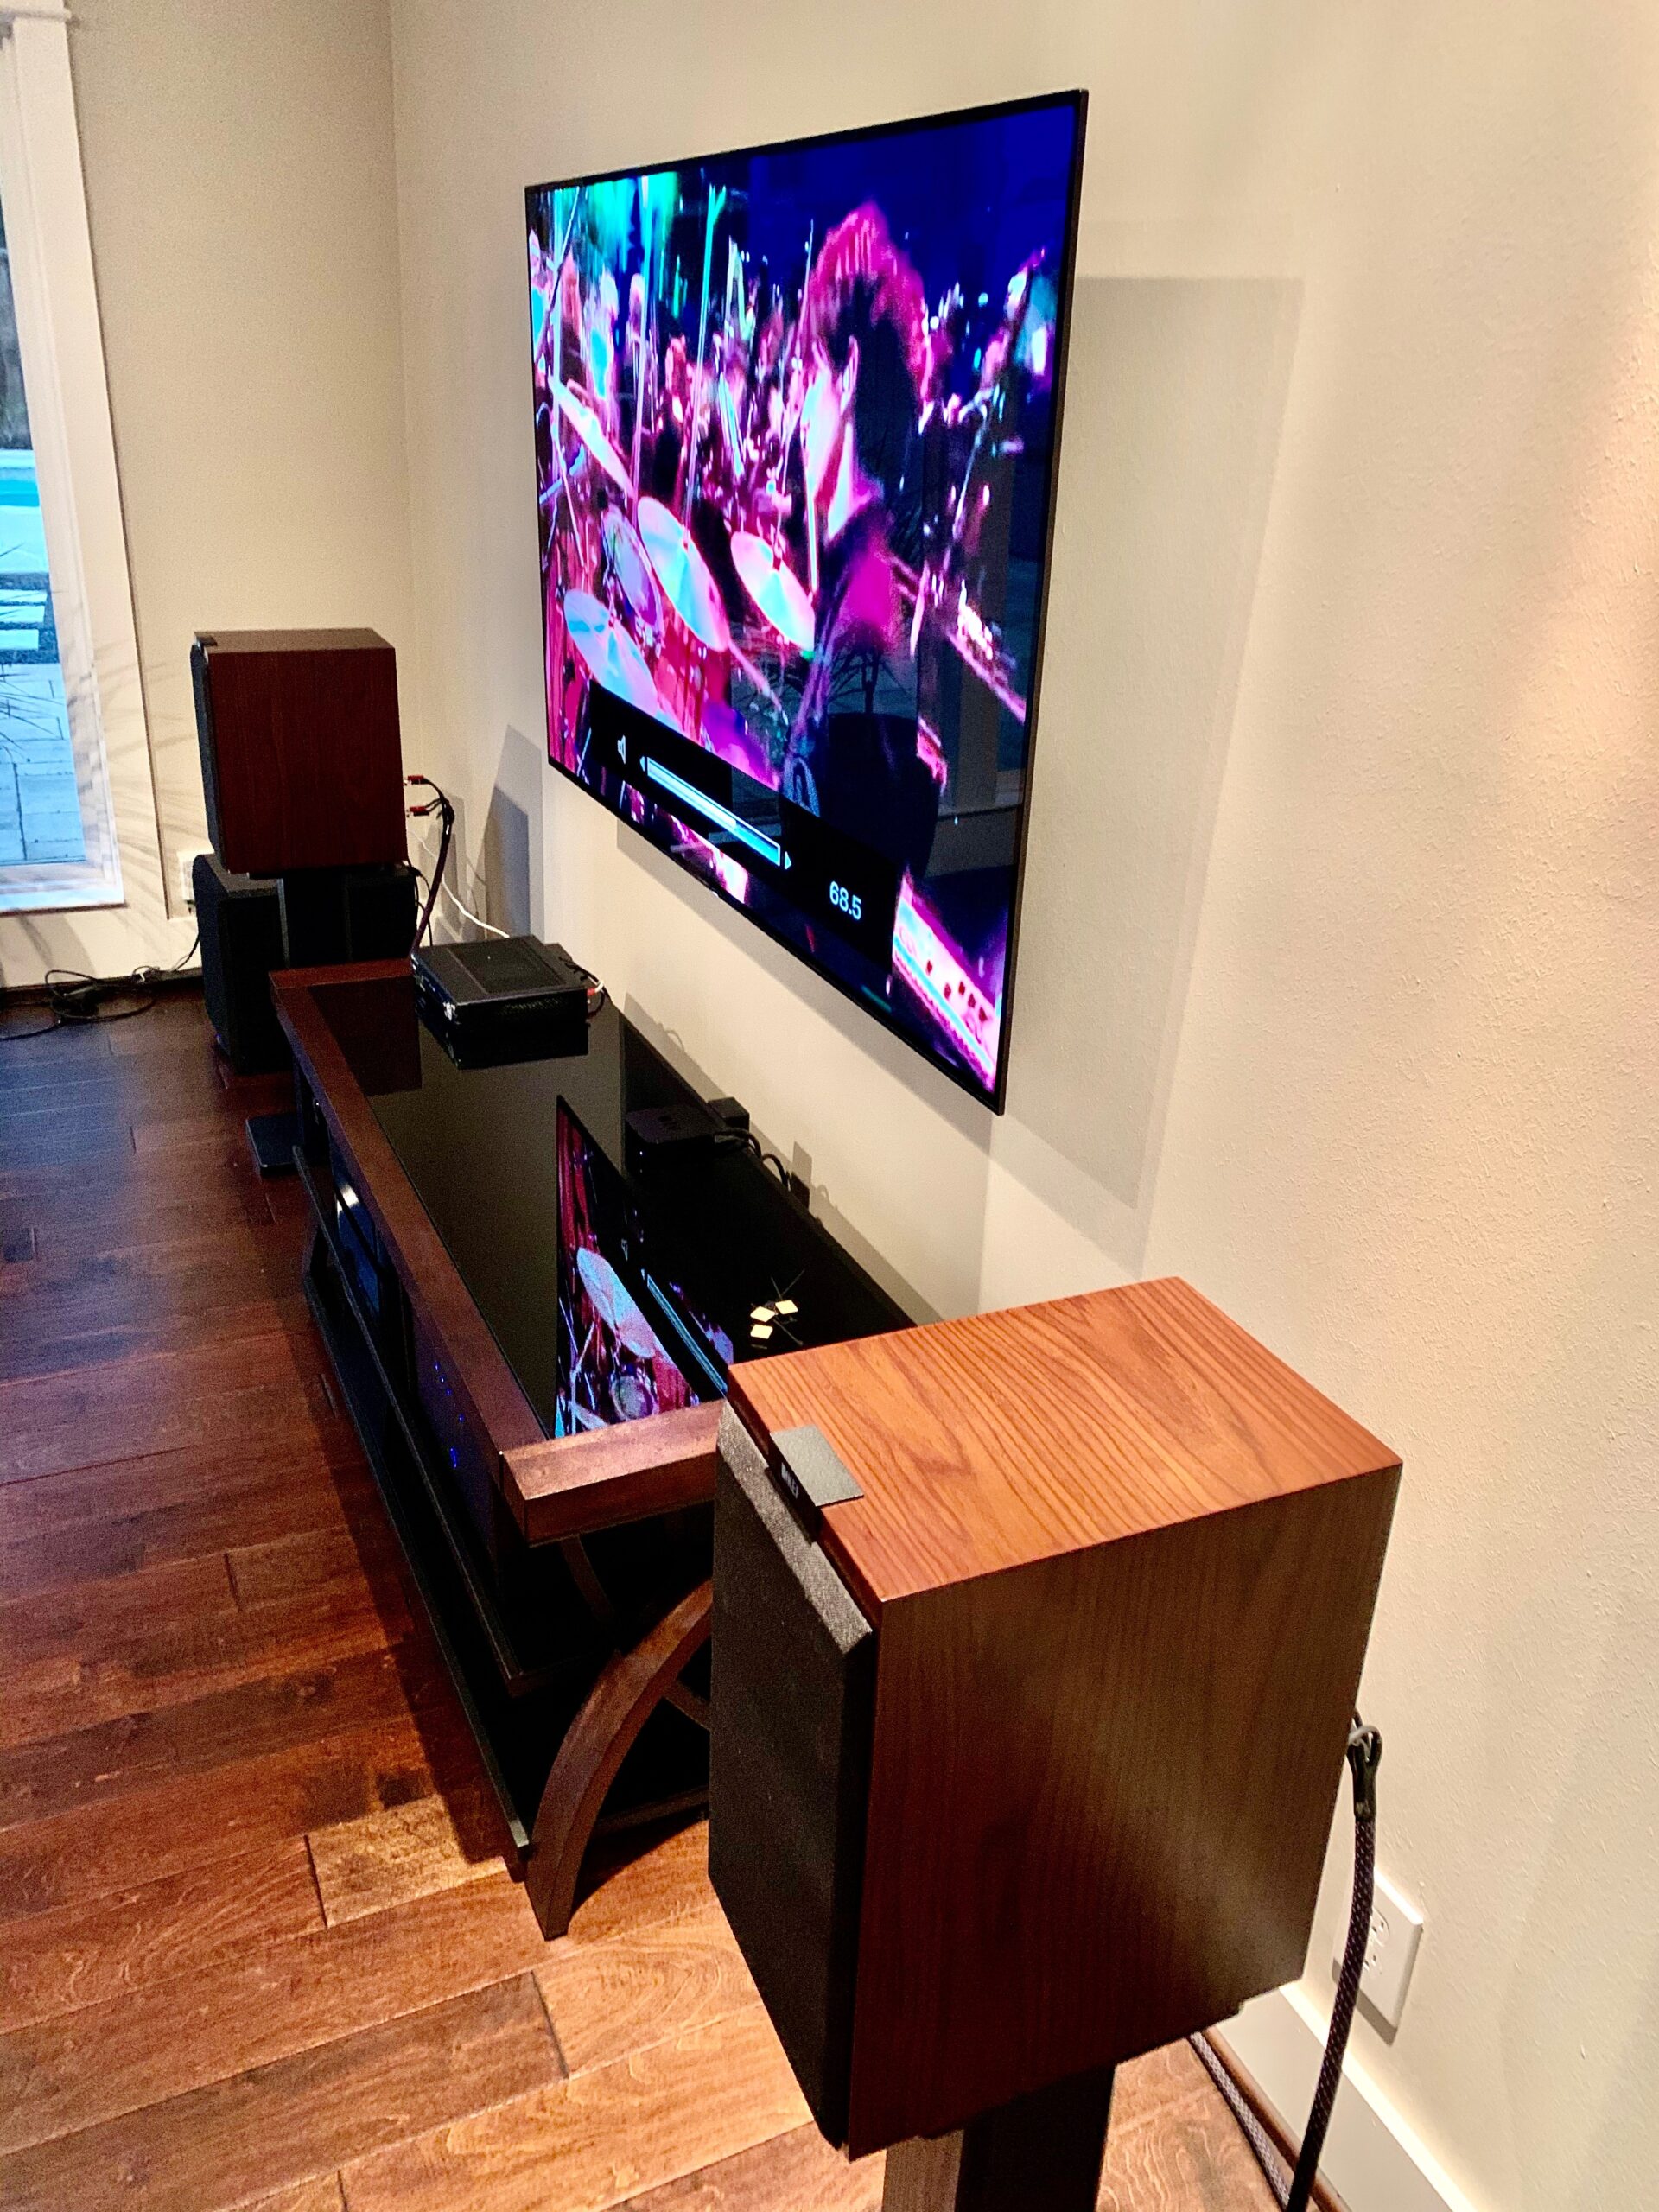 Mounted flat screen and loudspeakers audio system